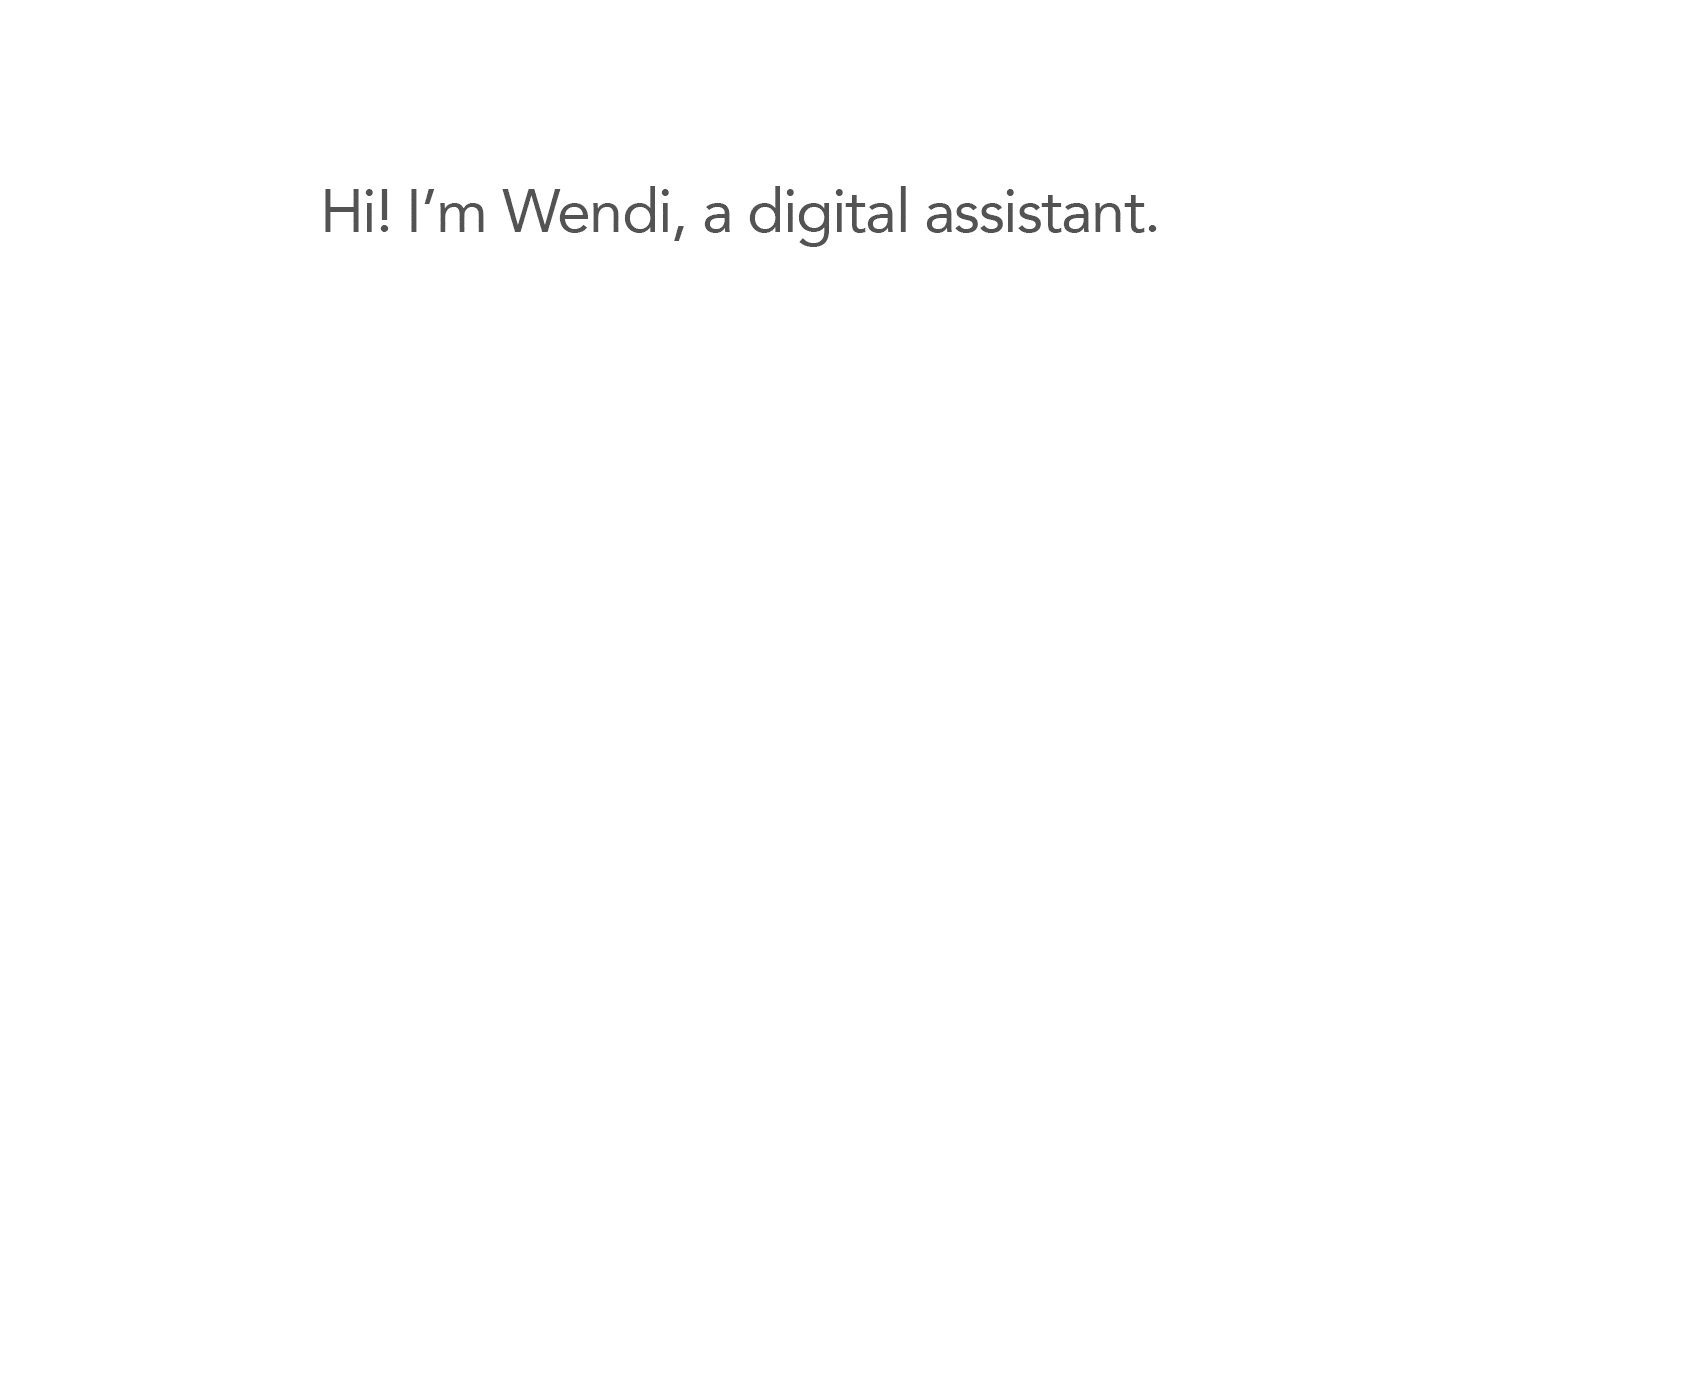 Wendi - A Digital Assistant For Healthcare